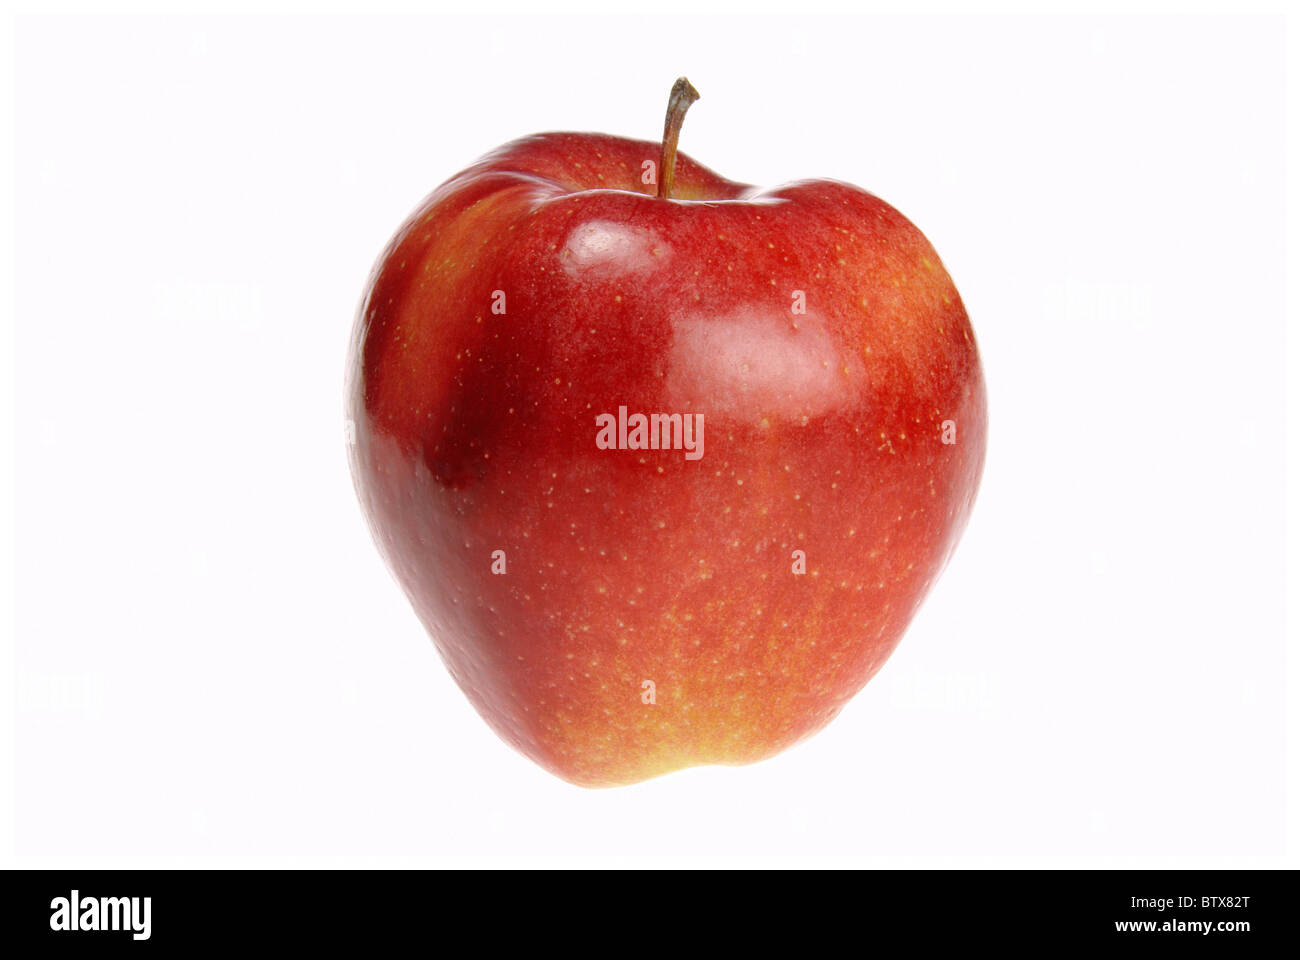 Apfel Gloster freigestellt - apple Gloster isolated 01 Stock Photo